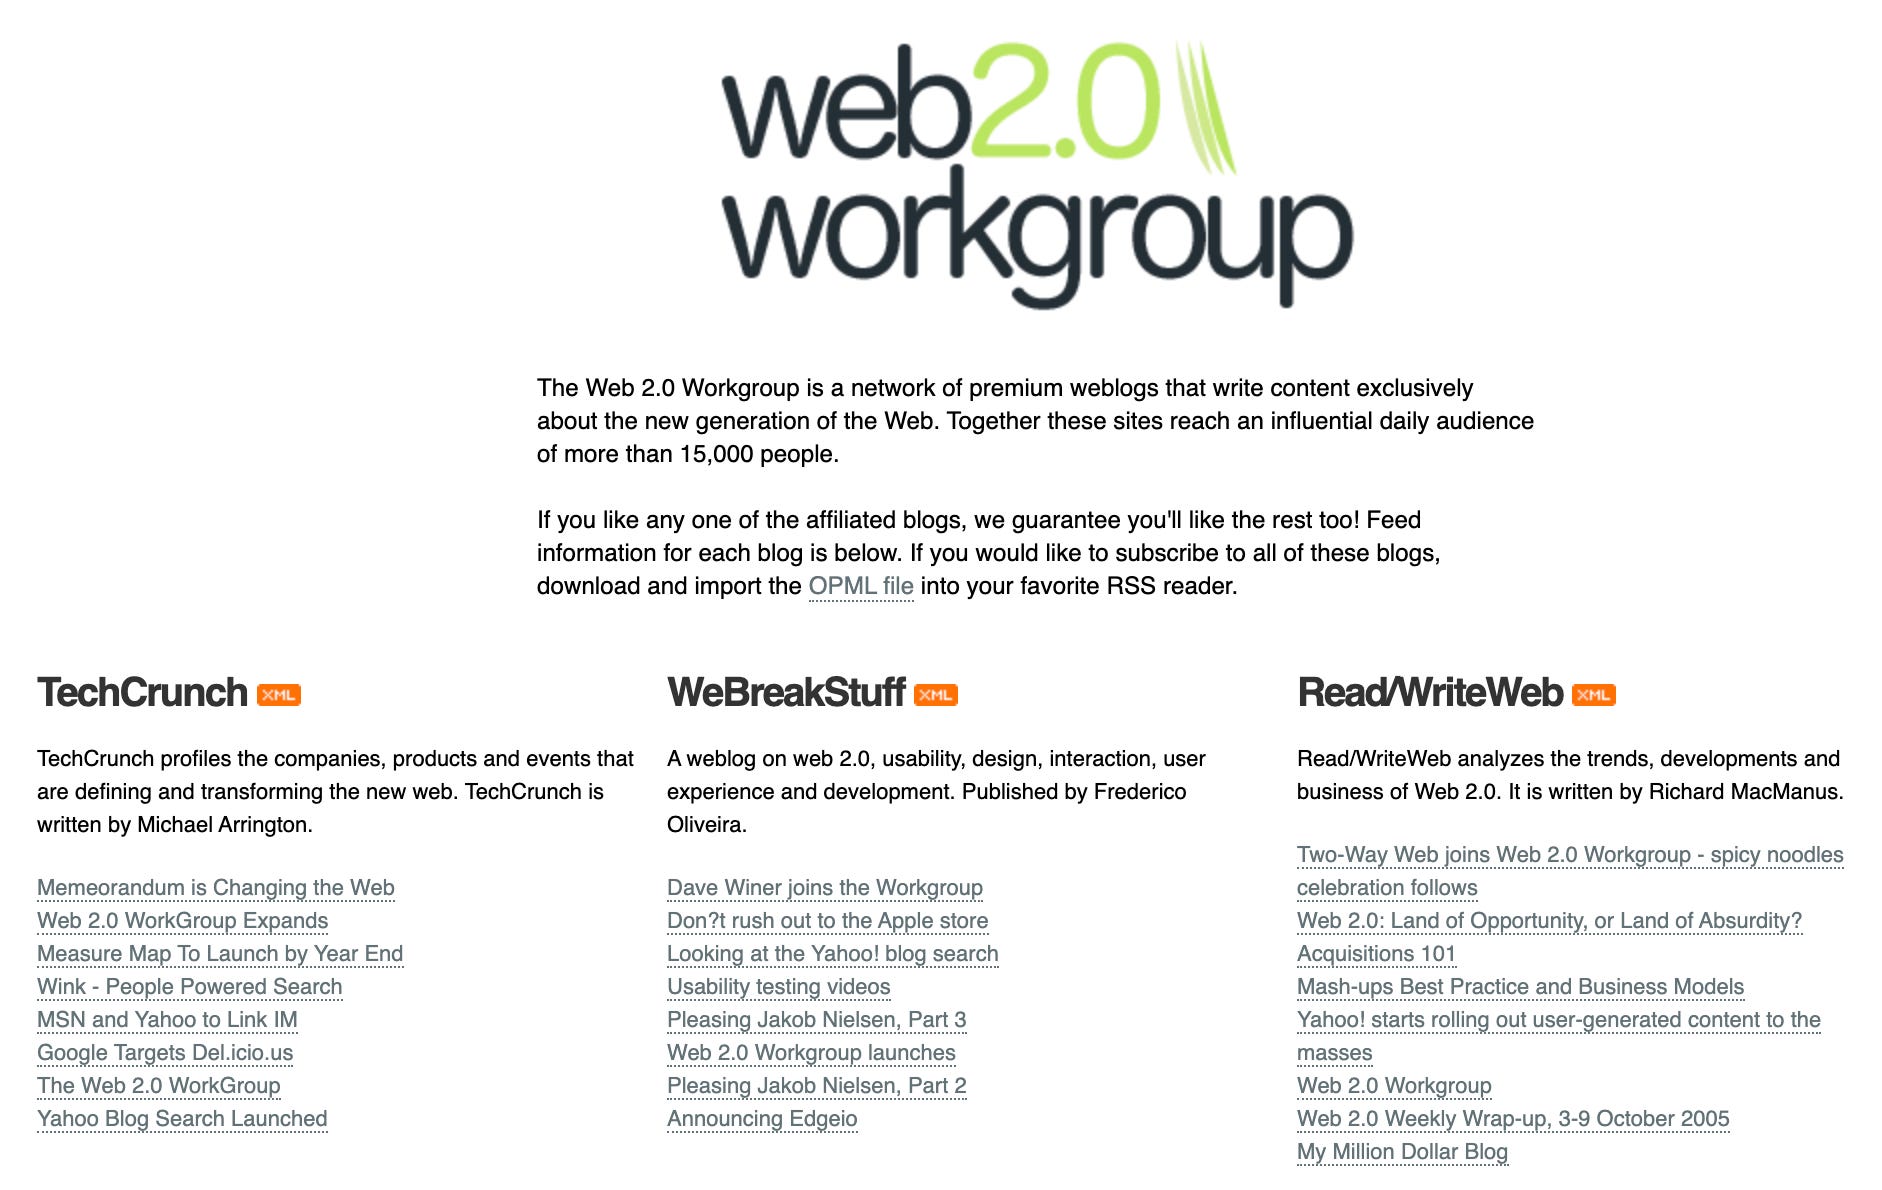 The Web 2.0 Workgroup homepage